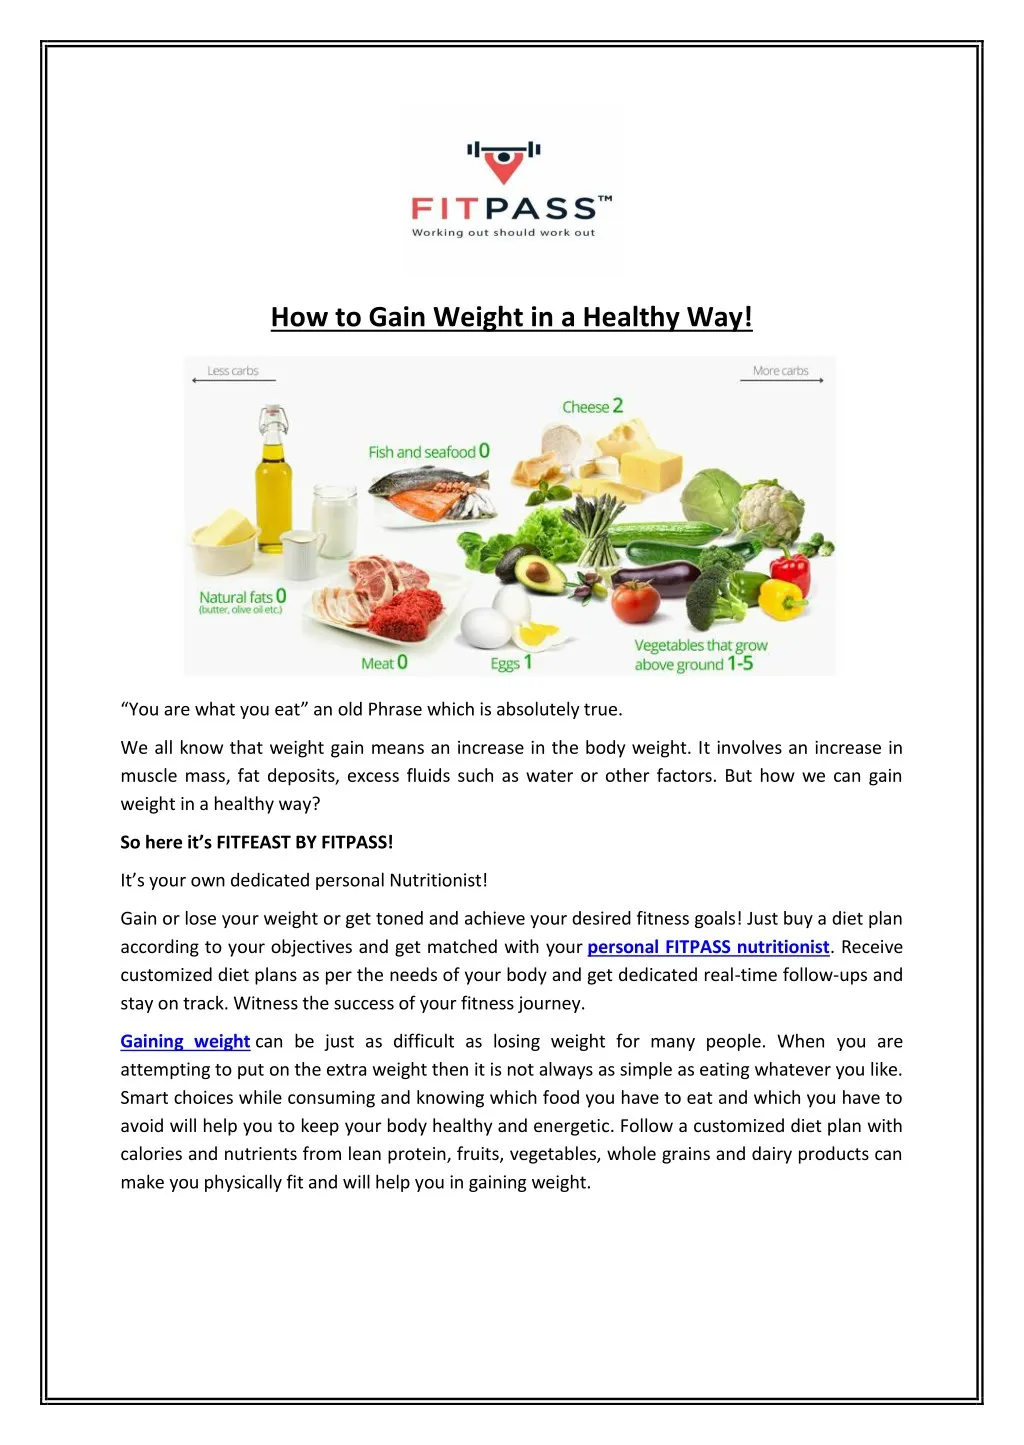 how to gain weight in a healthy way